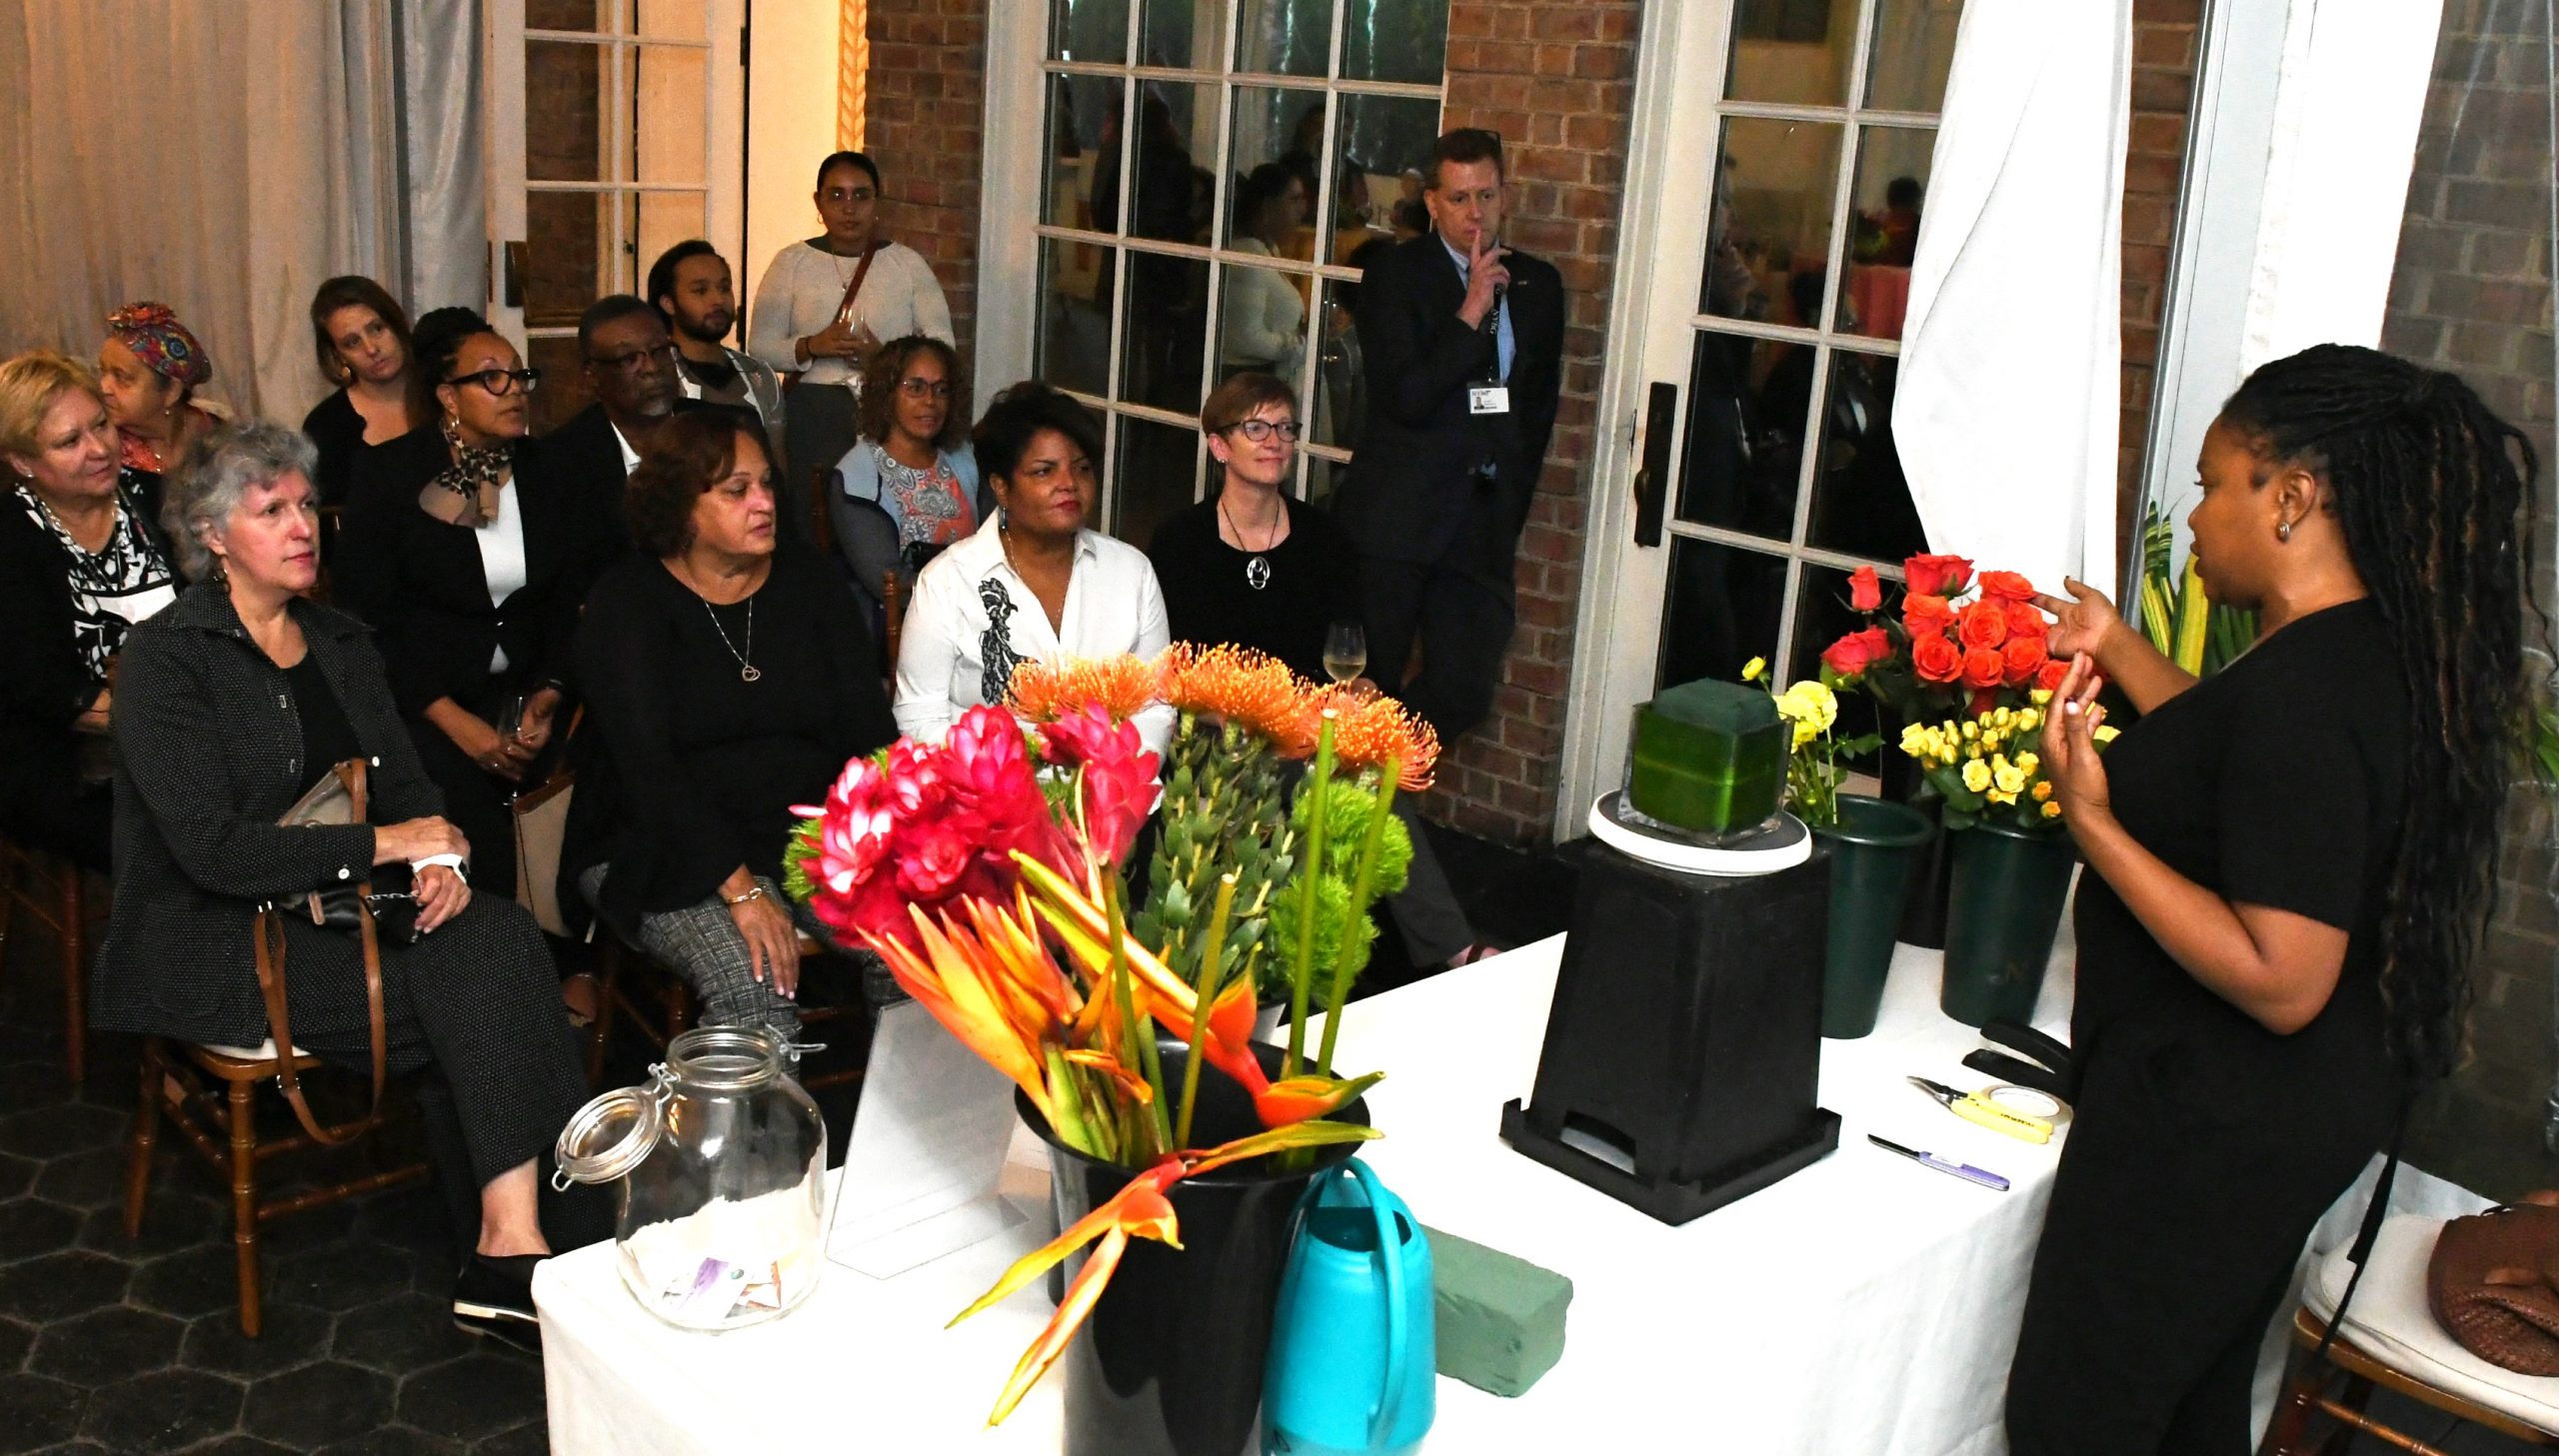 Guests sit for a floral design demonstration by a woman in black, standing behind a table covered in vases and flowers